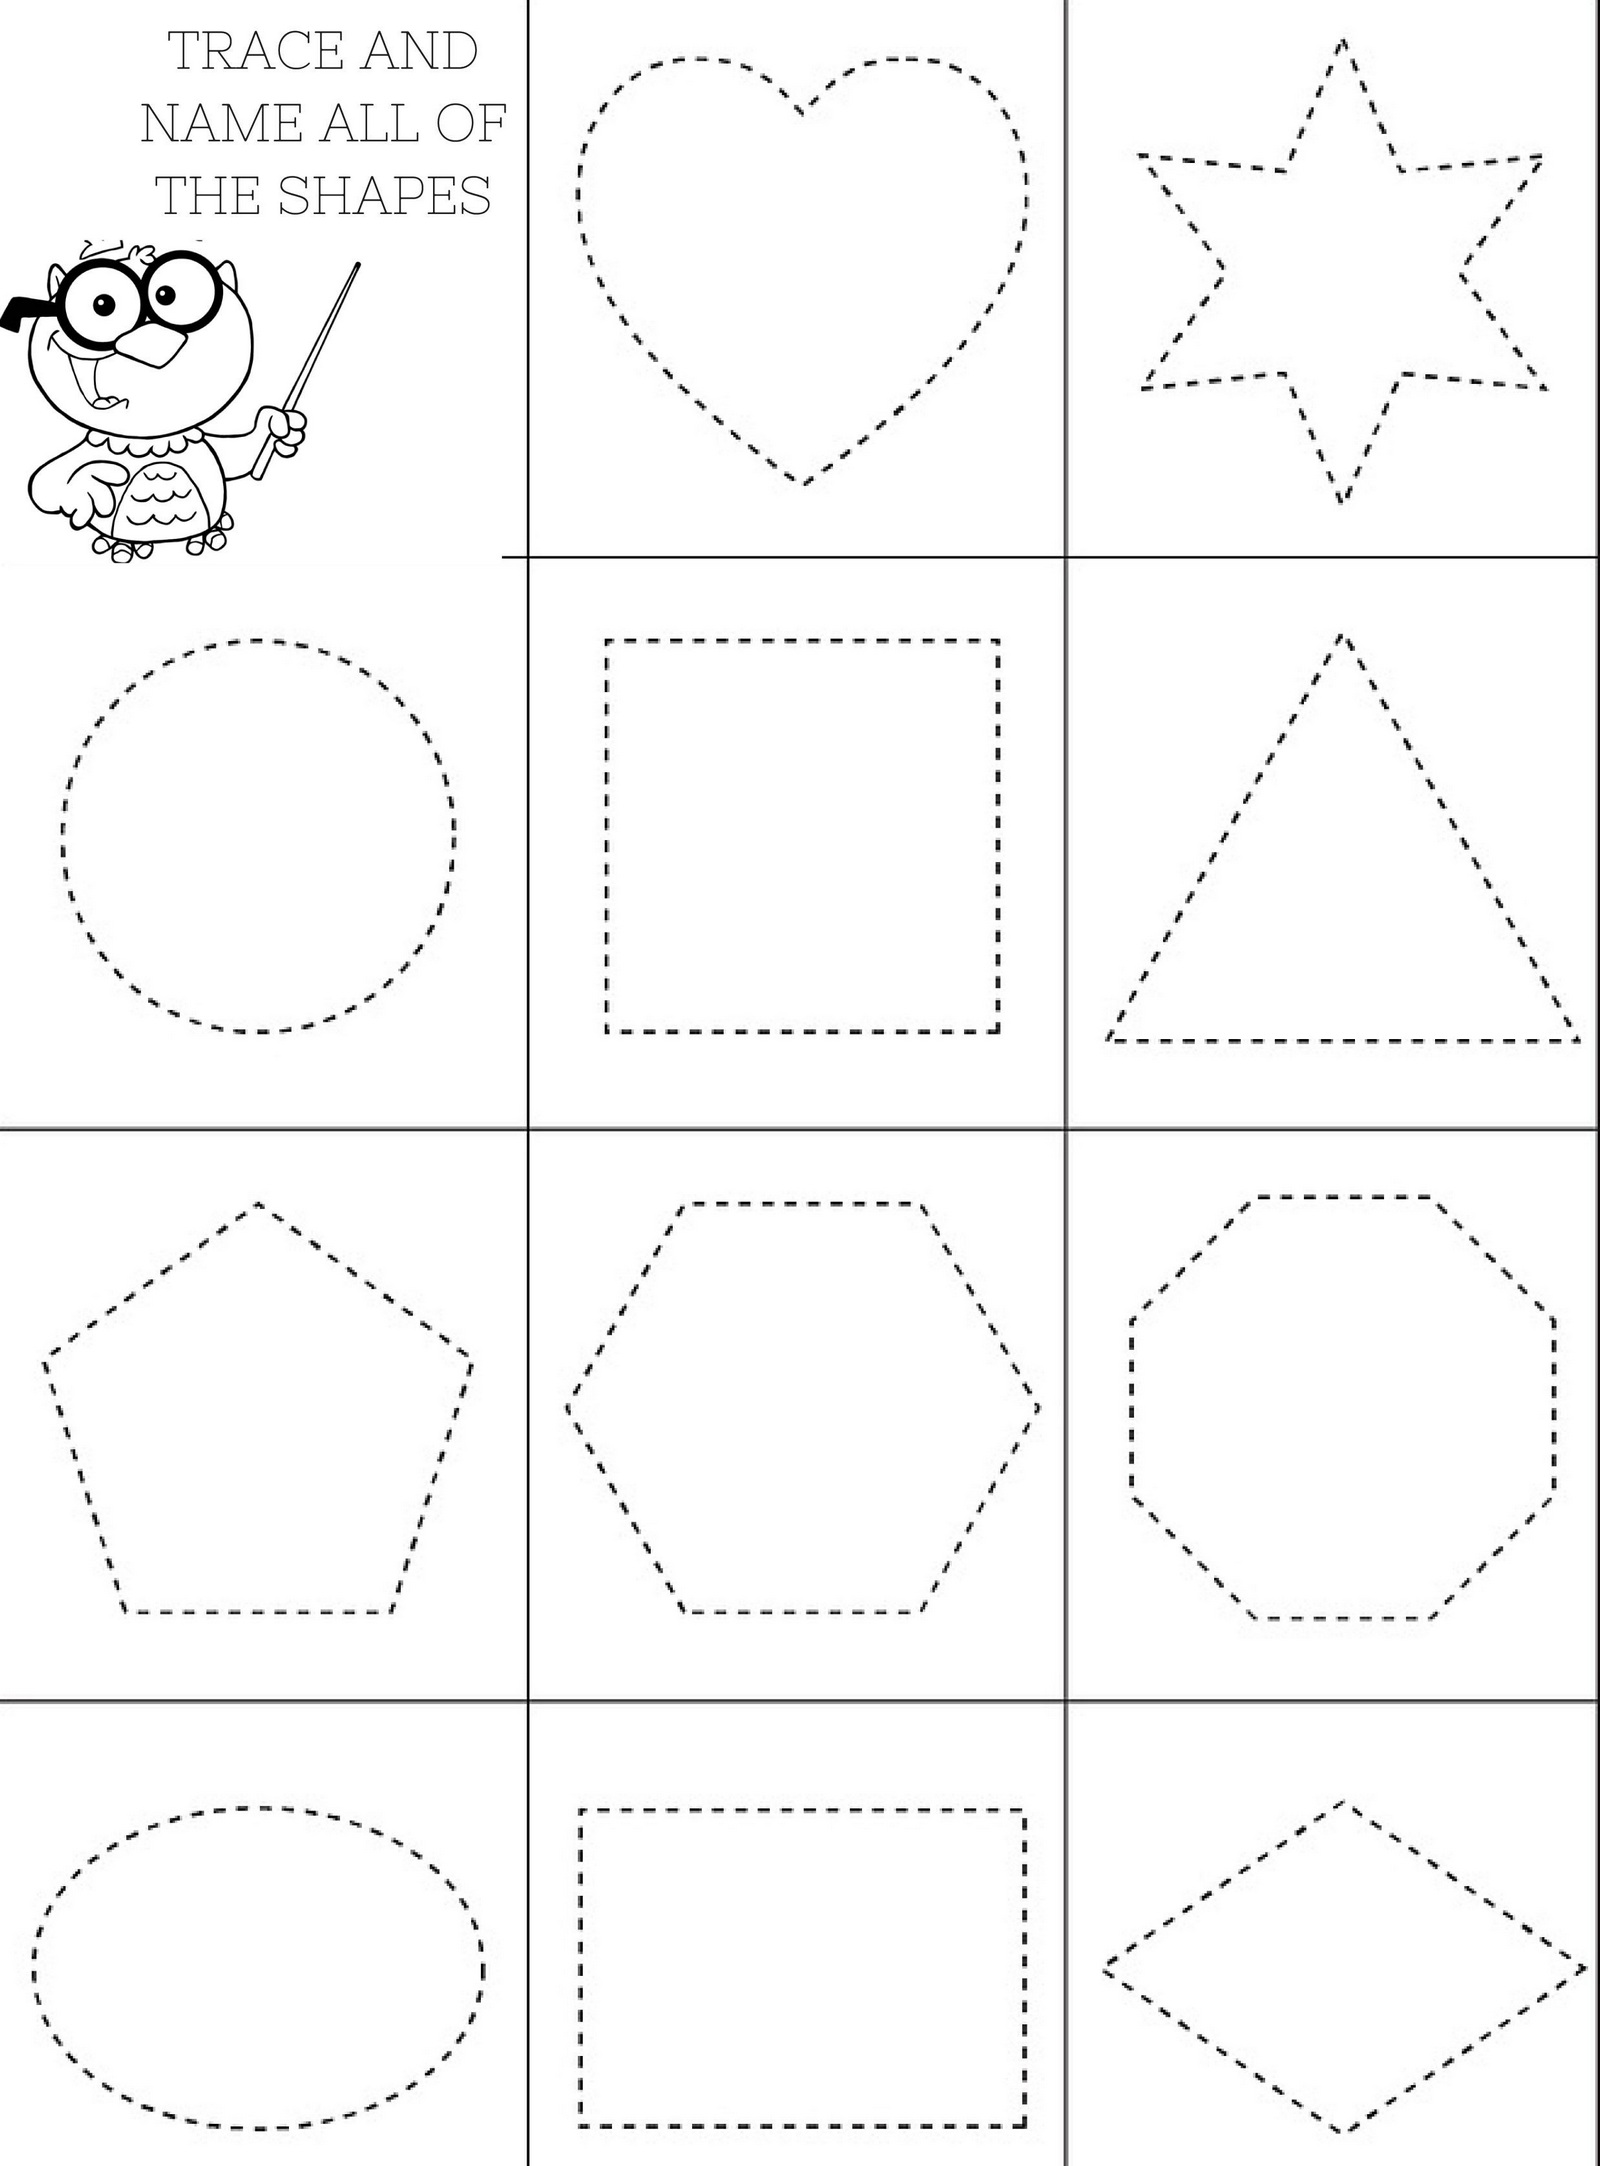 Printable shapes coloring page for preschool